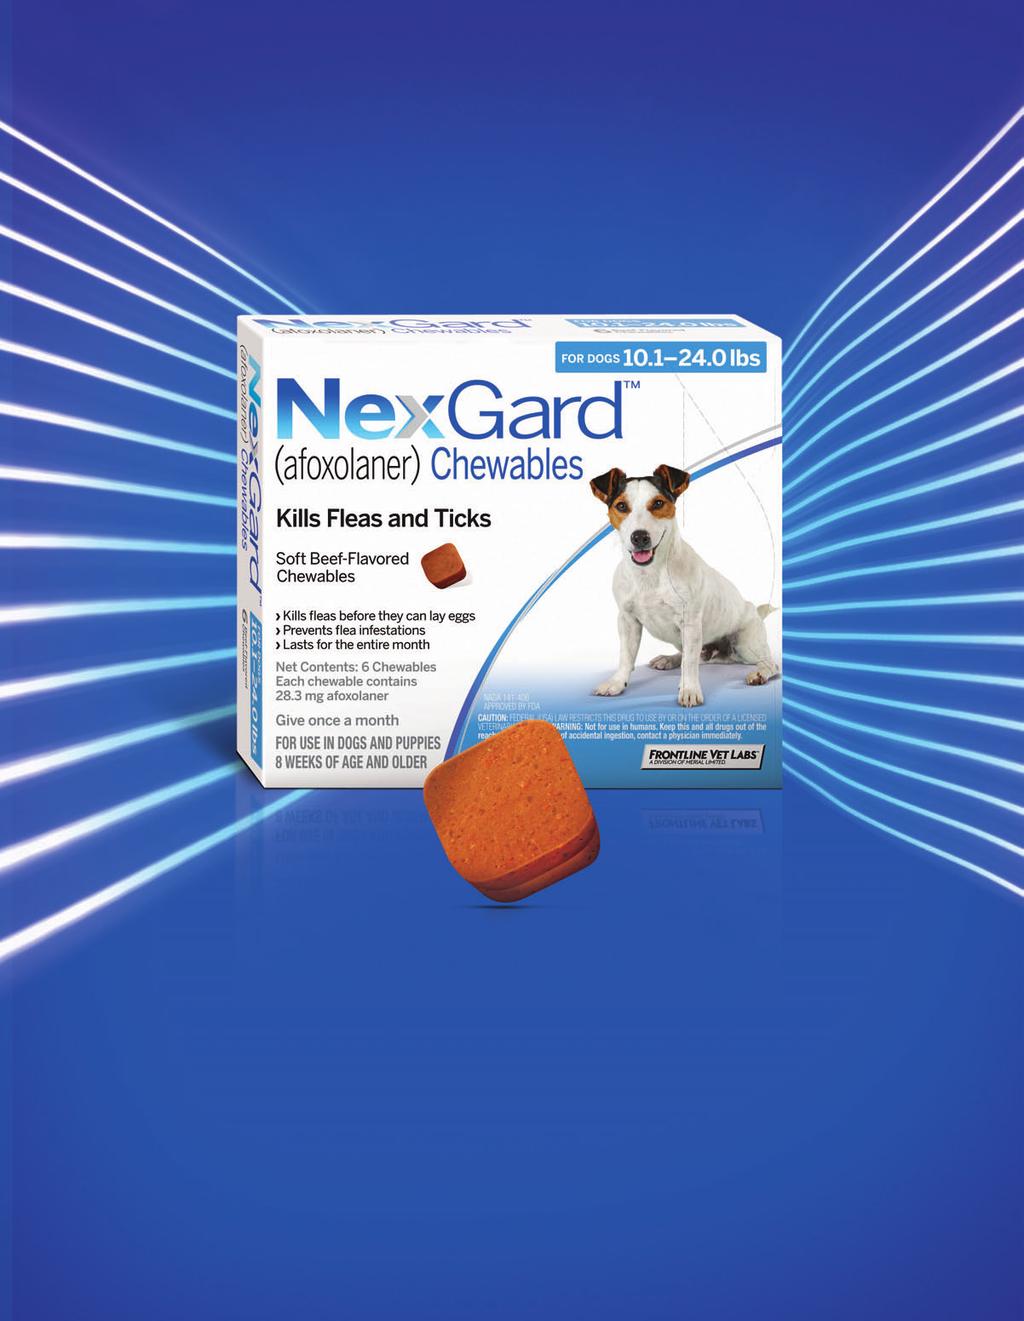 NEW! It s a soft chew. Kills BOTH fleas and ticks. It s prescription only. NexGard TM (afoxolaner) is the protection you asked for, and patients will beg for.